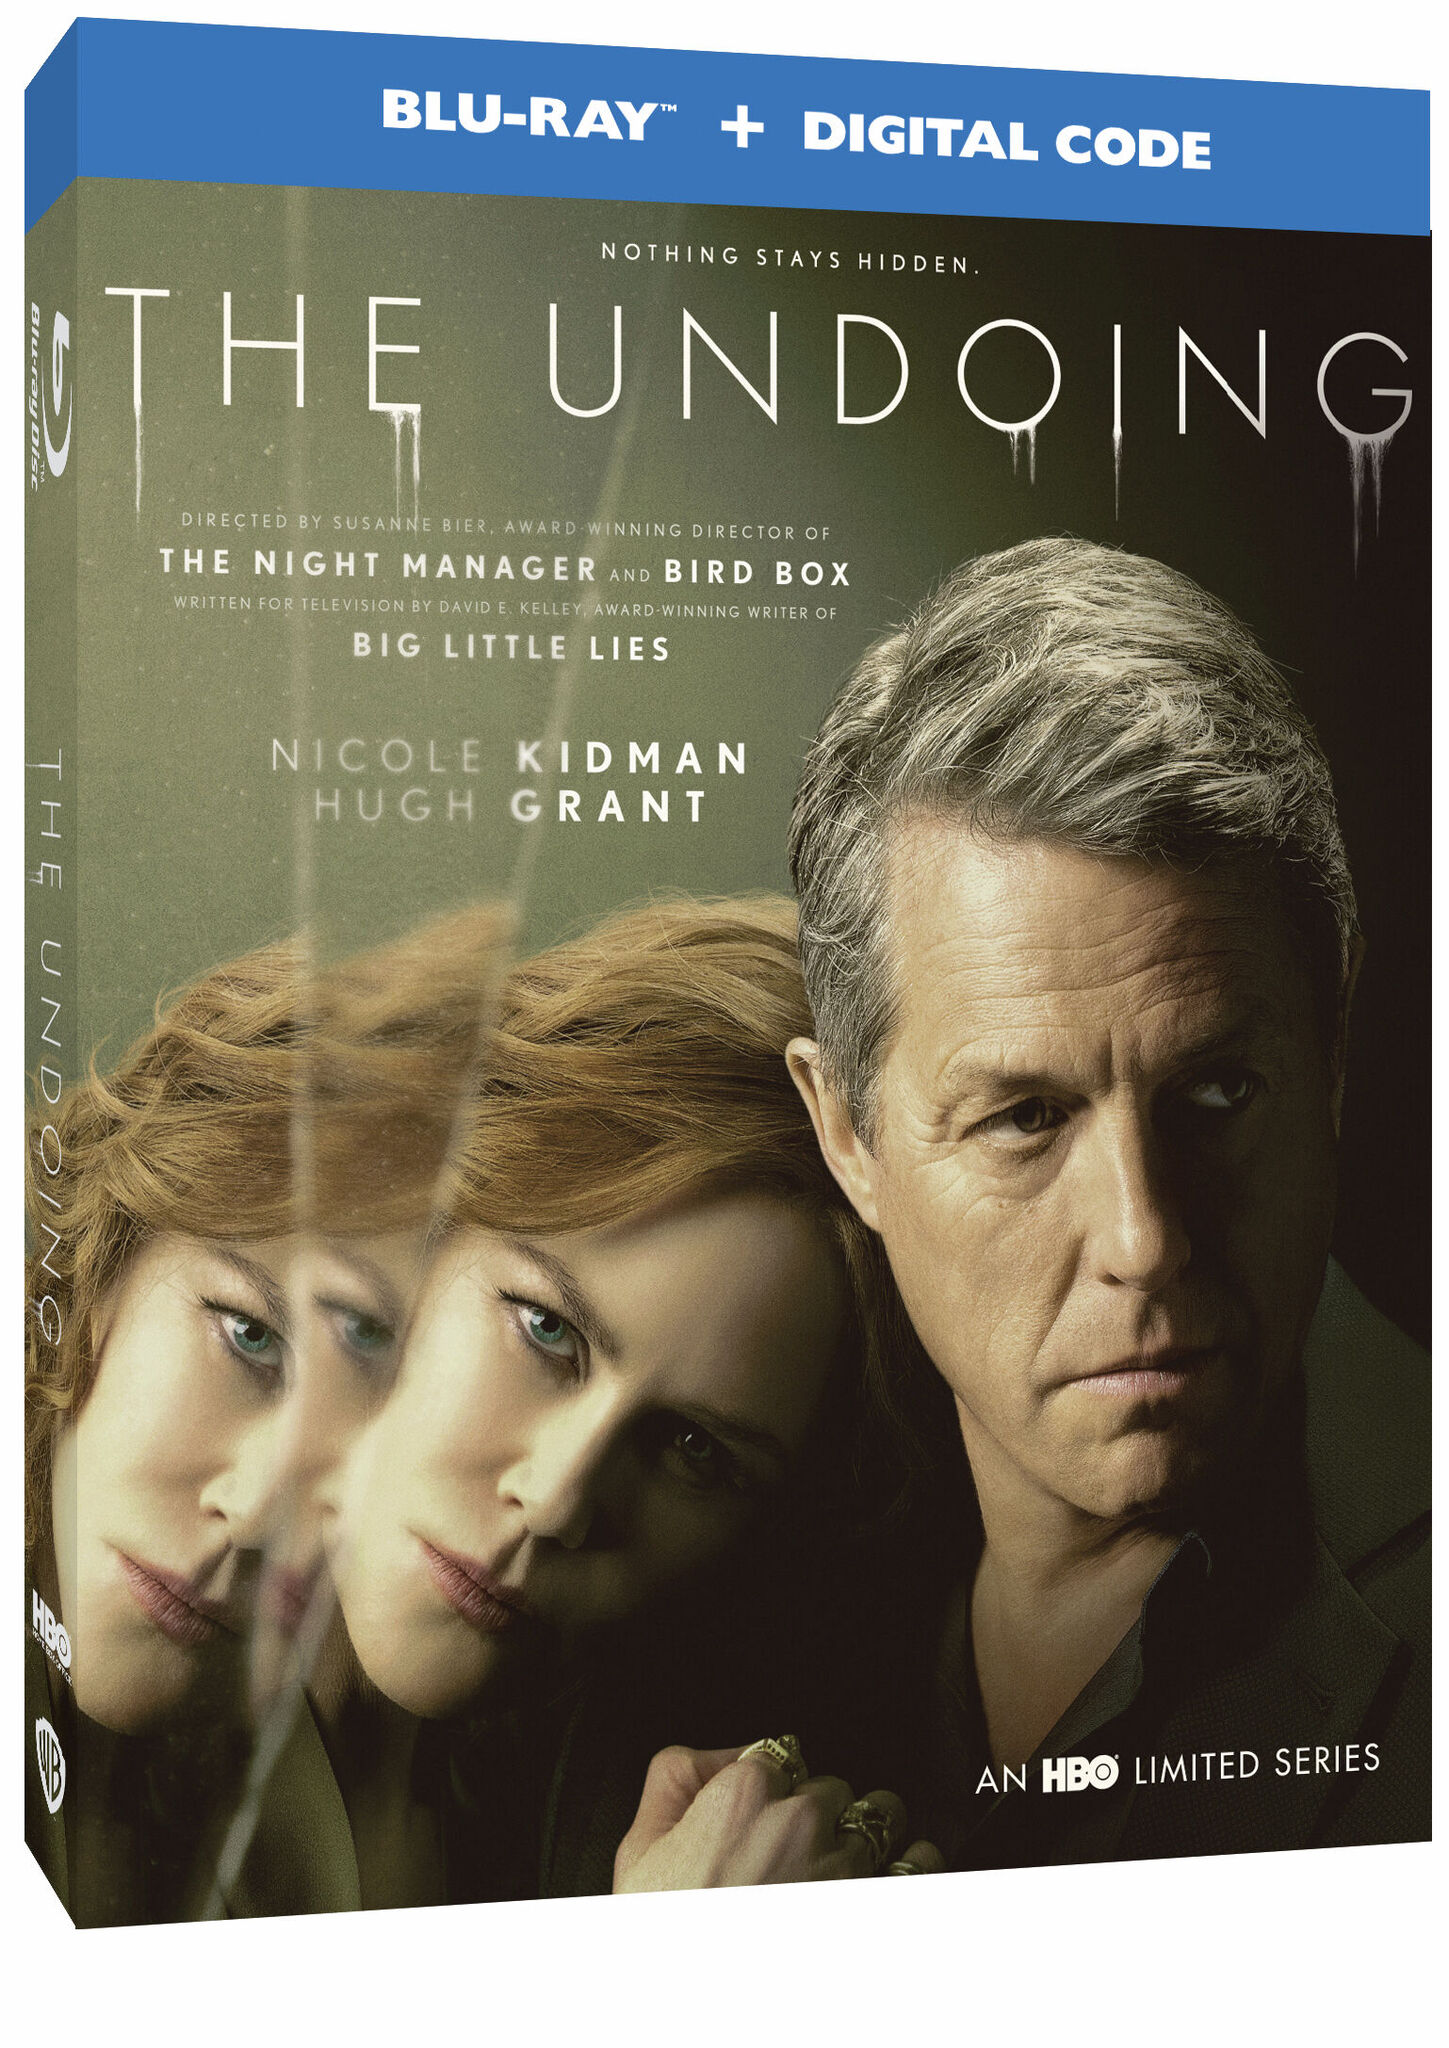 Coming to Blu-ray, DVD and Digital “The Undoing” original limited series with bonus features from HBO starring Hugh Grant, Nicole Kidman #Video #TheUndoing #video RCR News Media